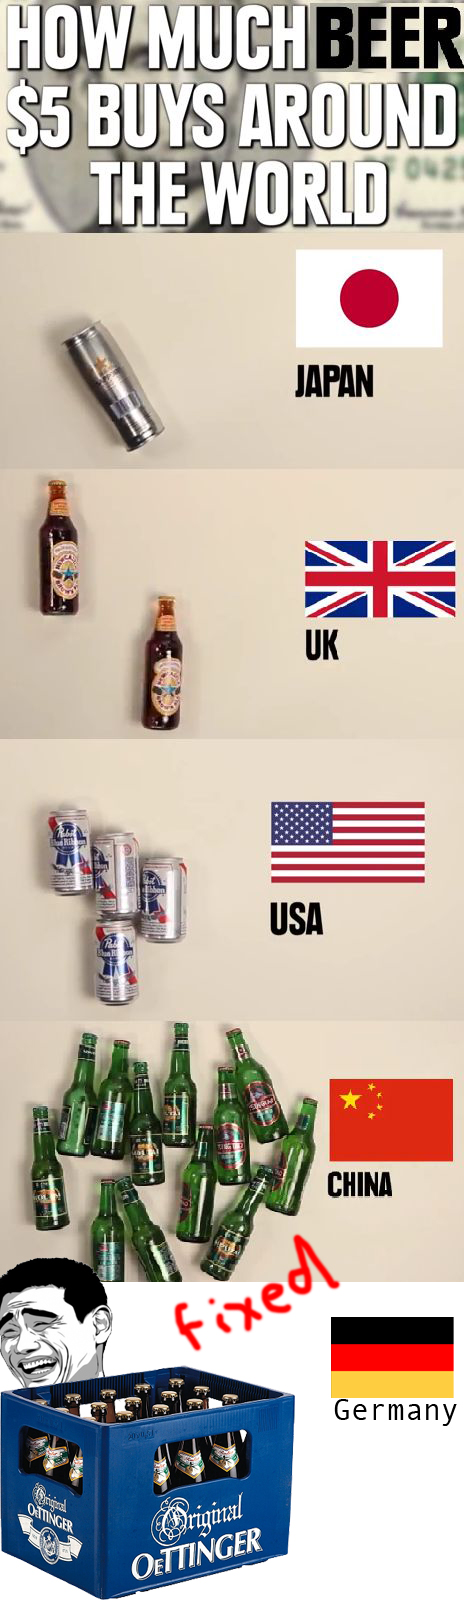 *fixed - how much beer!